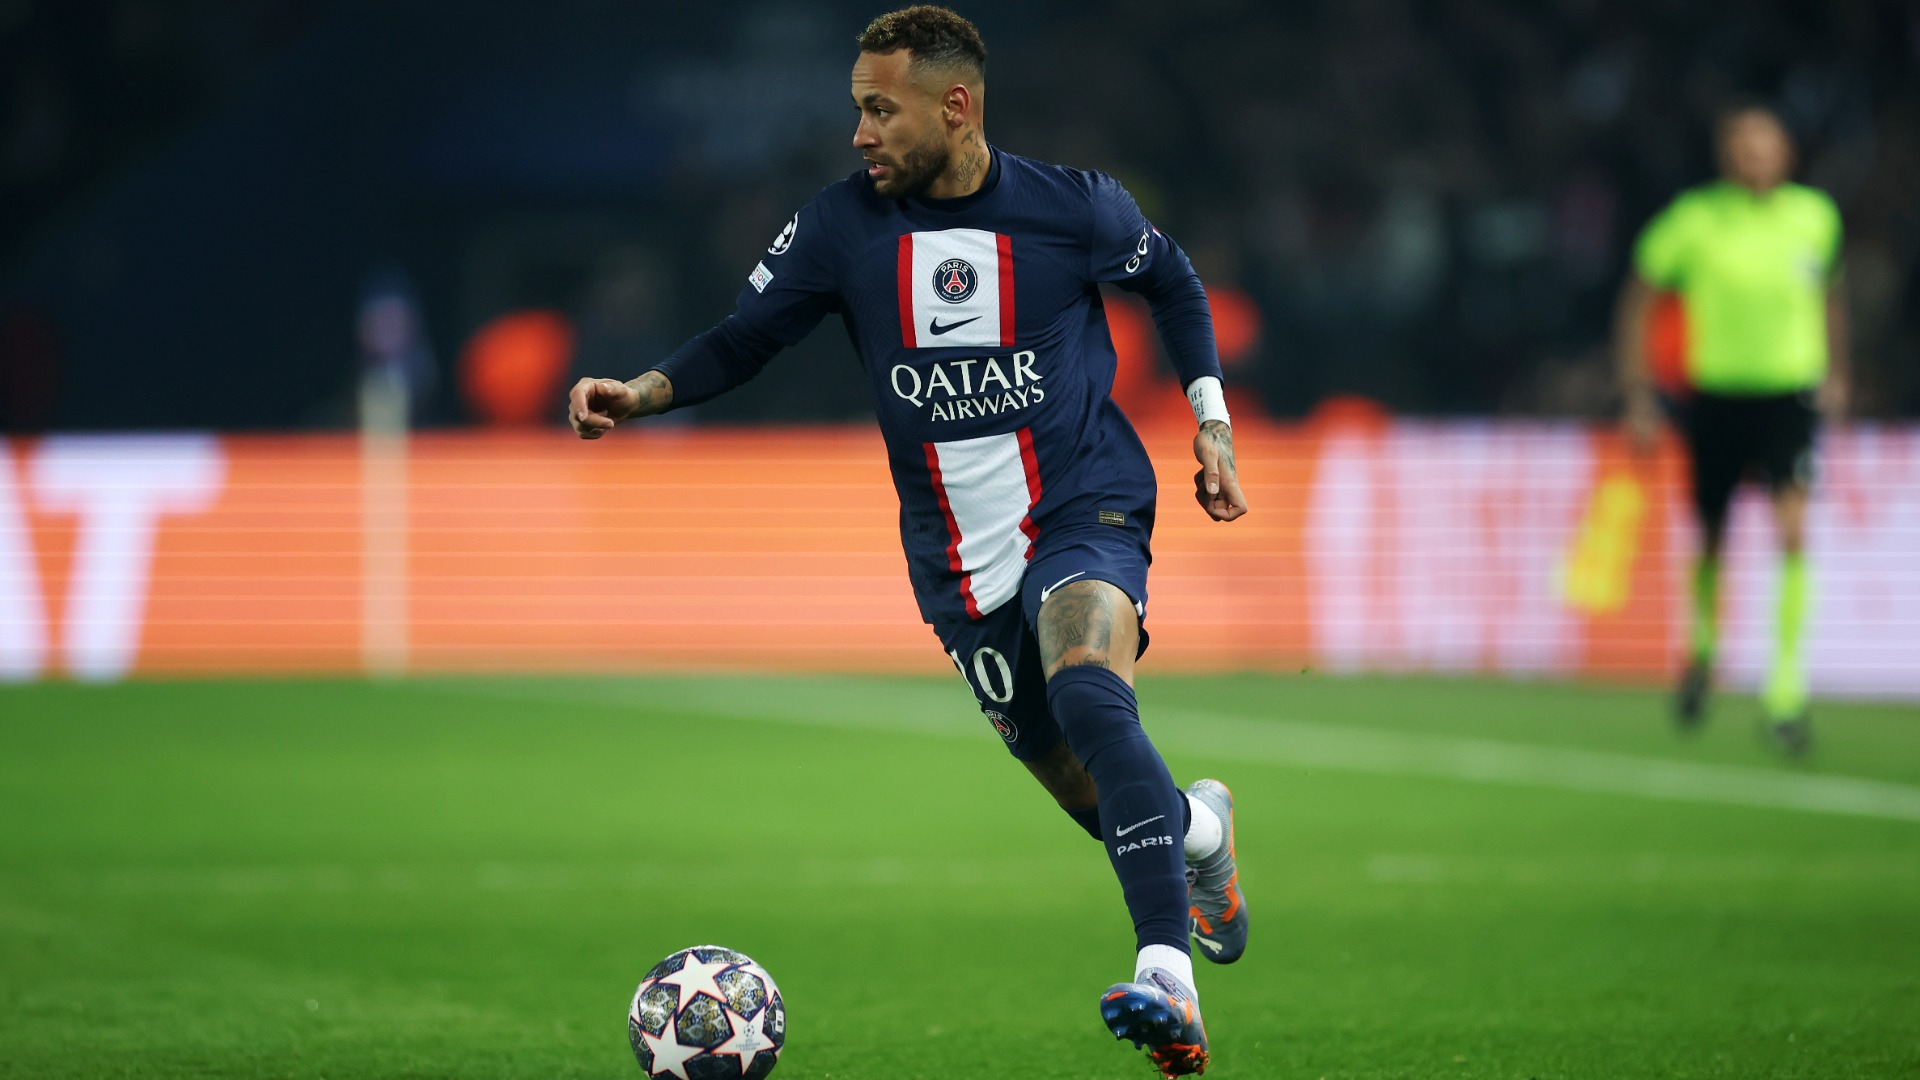 Al Hilal Plans to Buy Neymar After Failure to Buy Messi